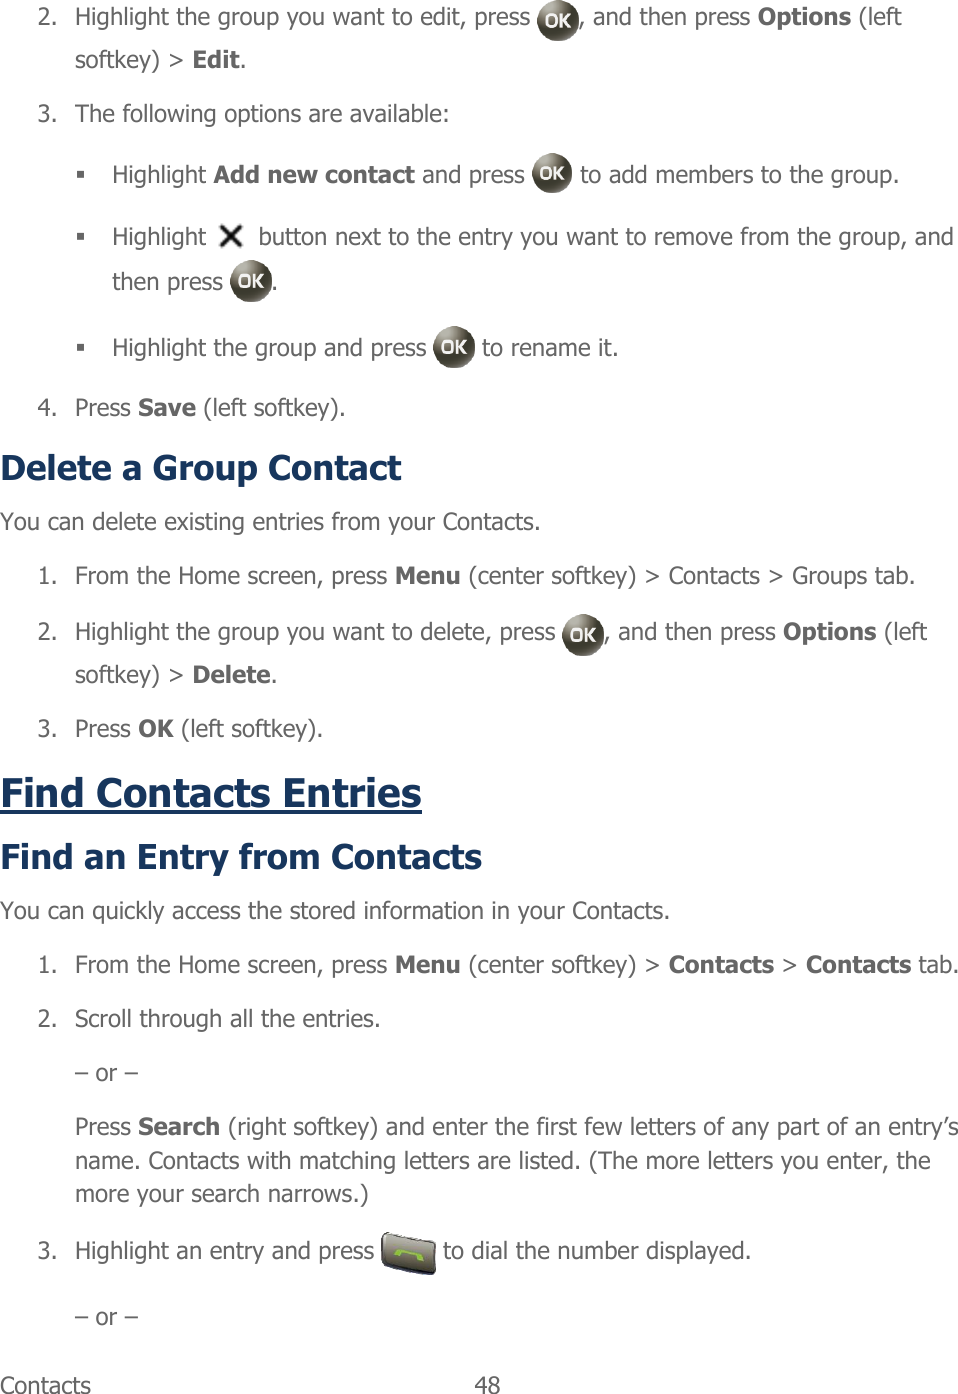  Contacts  48   2. Highlight the group you want to edit, press  , and then press Options (left softkey) &gt; Edit. 3. The following options are available:  Highlight Add new contact and press   to add members to the group.  Highlight   button next to the entry you want to remove from the group, and then press  .  Highlight the group and press   to rename it. 4. Press Save (left softkey). Delete a Group Contact  You can delete existing entries from your Contacts. 1. From the Home screen, press Menu (center softkey) &gt; Contacts &gt; Groups tab. 2. Highlight the group you want to delete, press  , and then press Options (left softkey) &gt; Delete. 3. Press OK (left softkey). Find Contacts Entries Find an Entry from Contacts You can quickly access the stored information in your Contacts. 1. From the Home screen, press Menu (center softkey) &gt; Contacts &gt; Contacts tab. 2. Scroll through all the entries. – or – Press Search (right softkey) and enter the first few letters of any part of an entry’s name. Contacts with matching letters are listed. (The more letters you enter, the more your search narrows.) 3. Highlight an entry and press   to dial the number displayed. – or – 